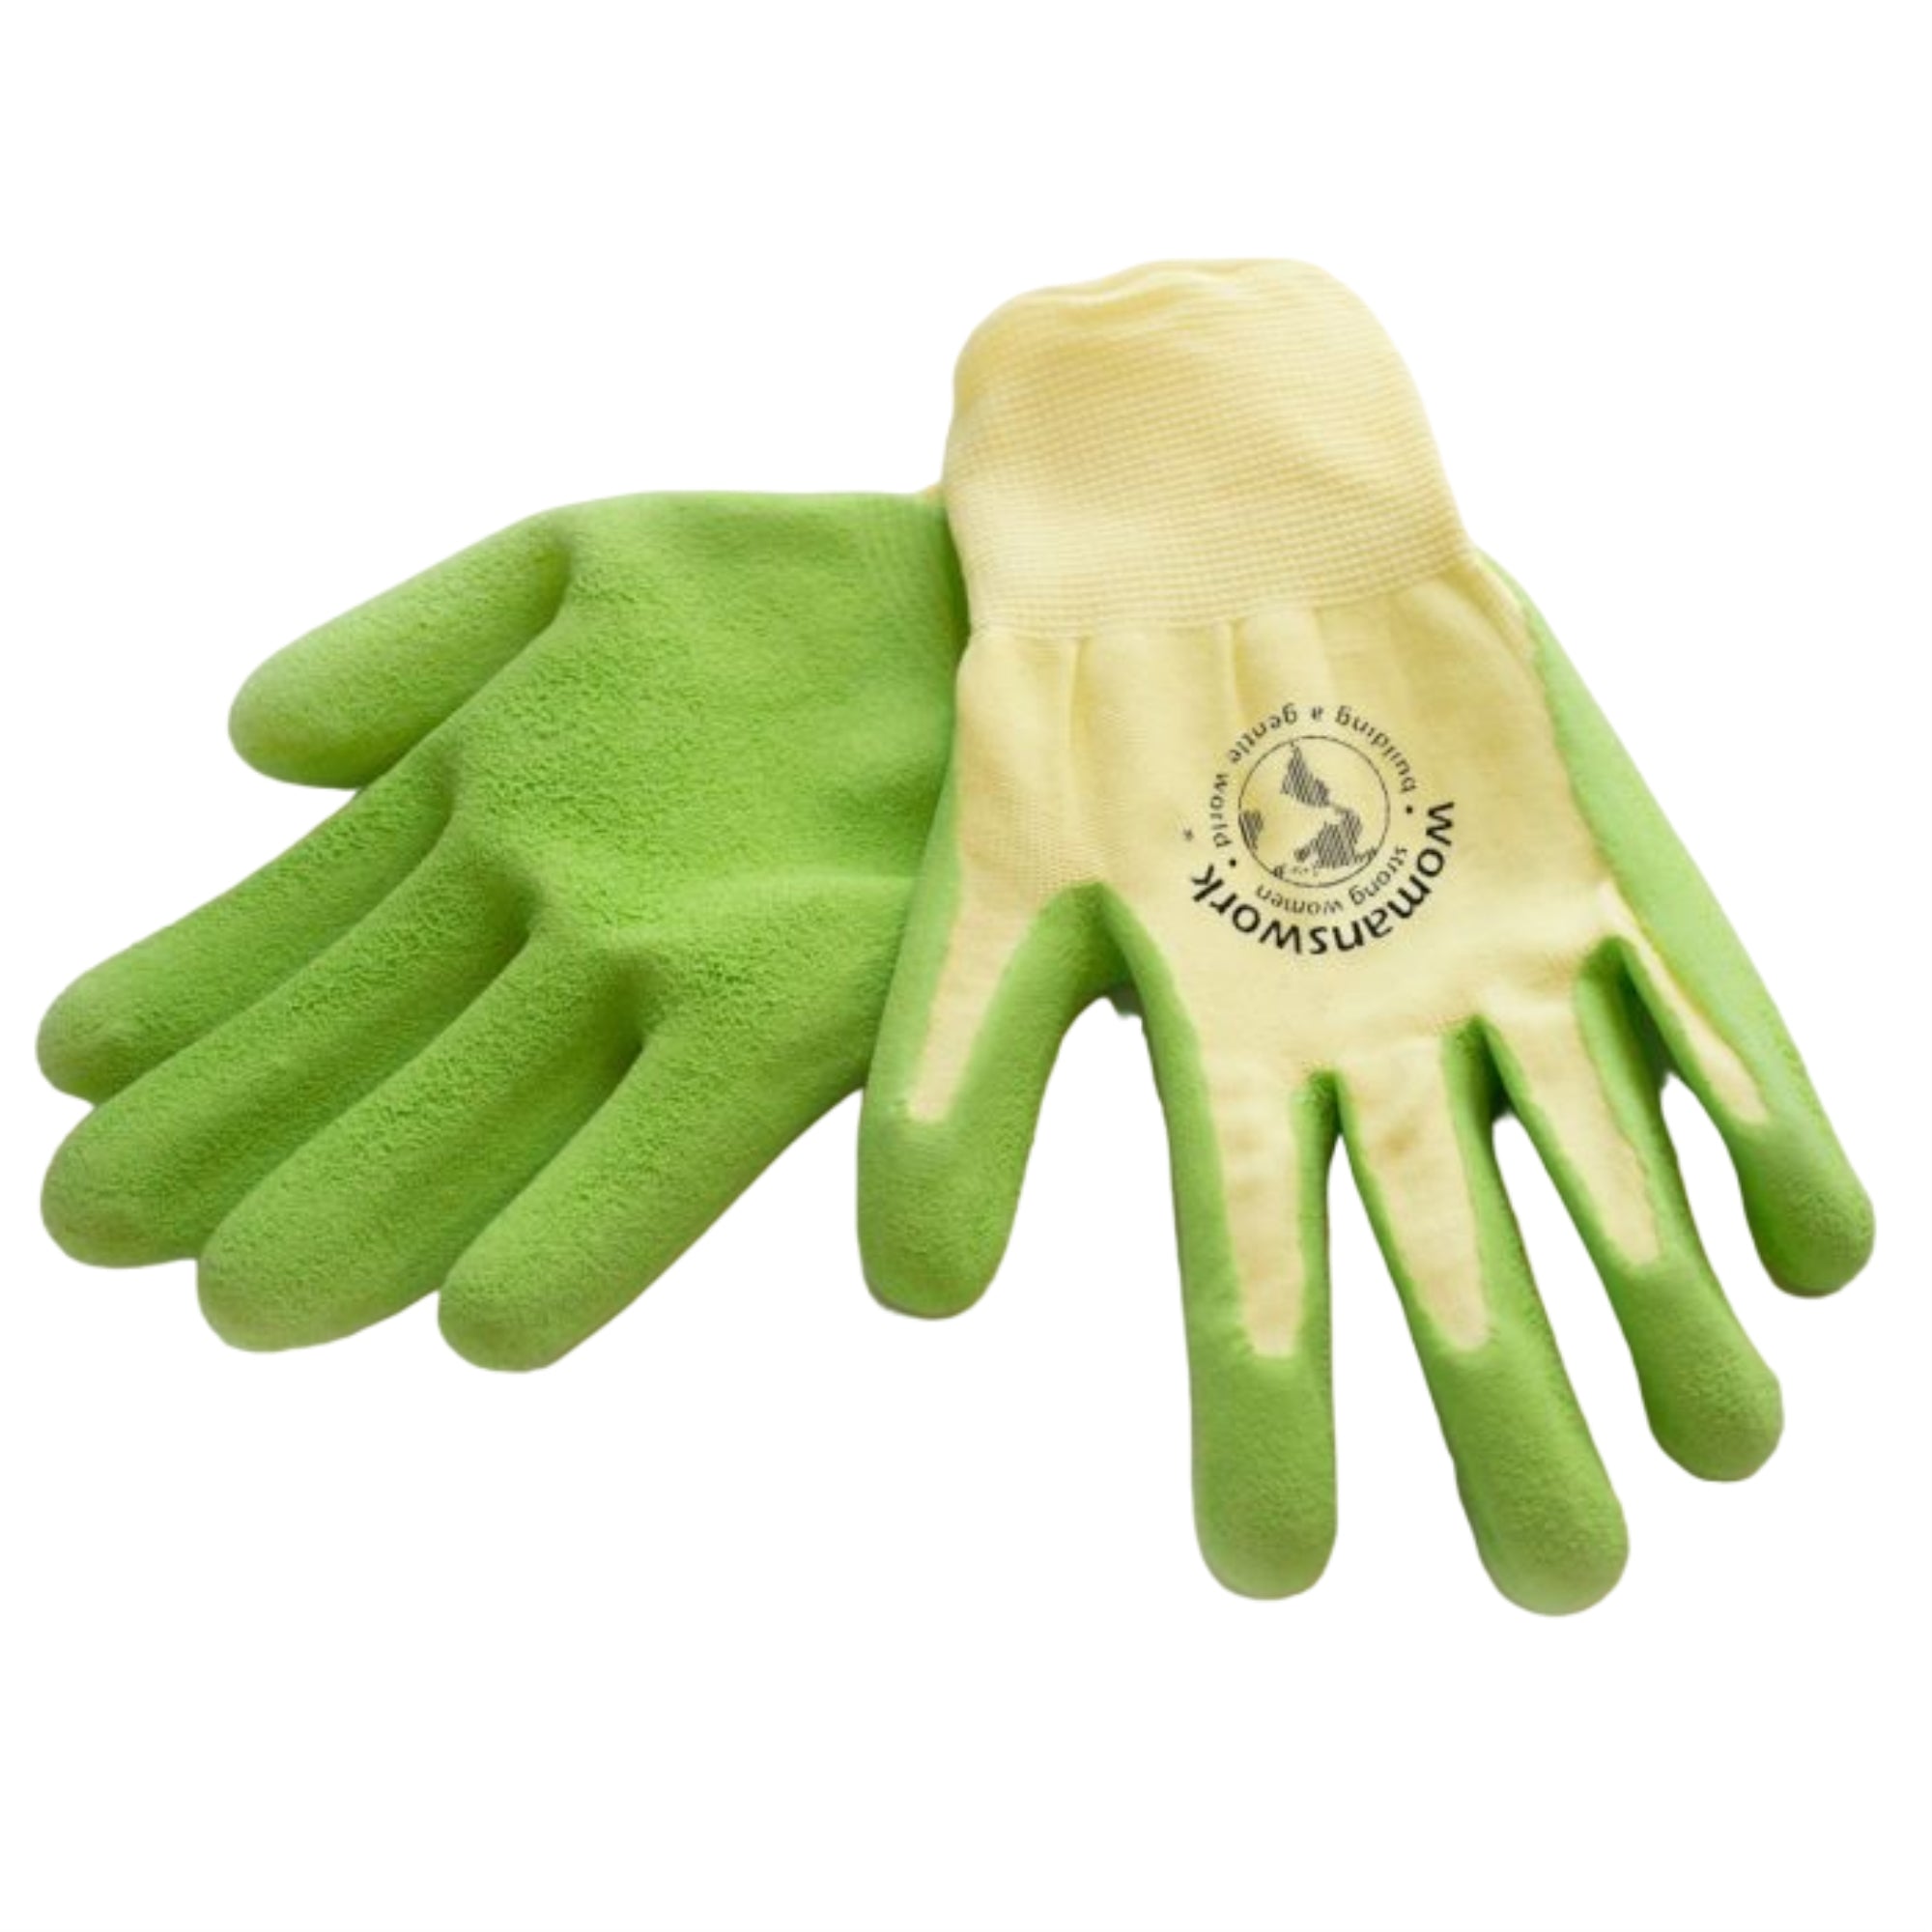 Womanswork Gardening Protective Weeding Gloves, Green, Large (Pack of 1)